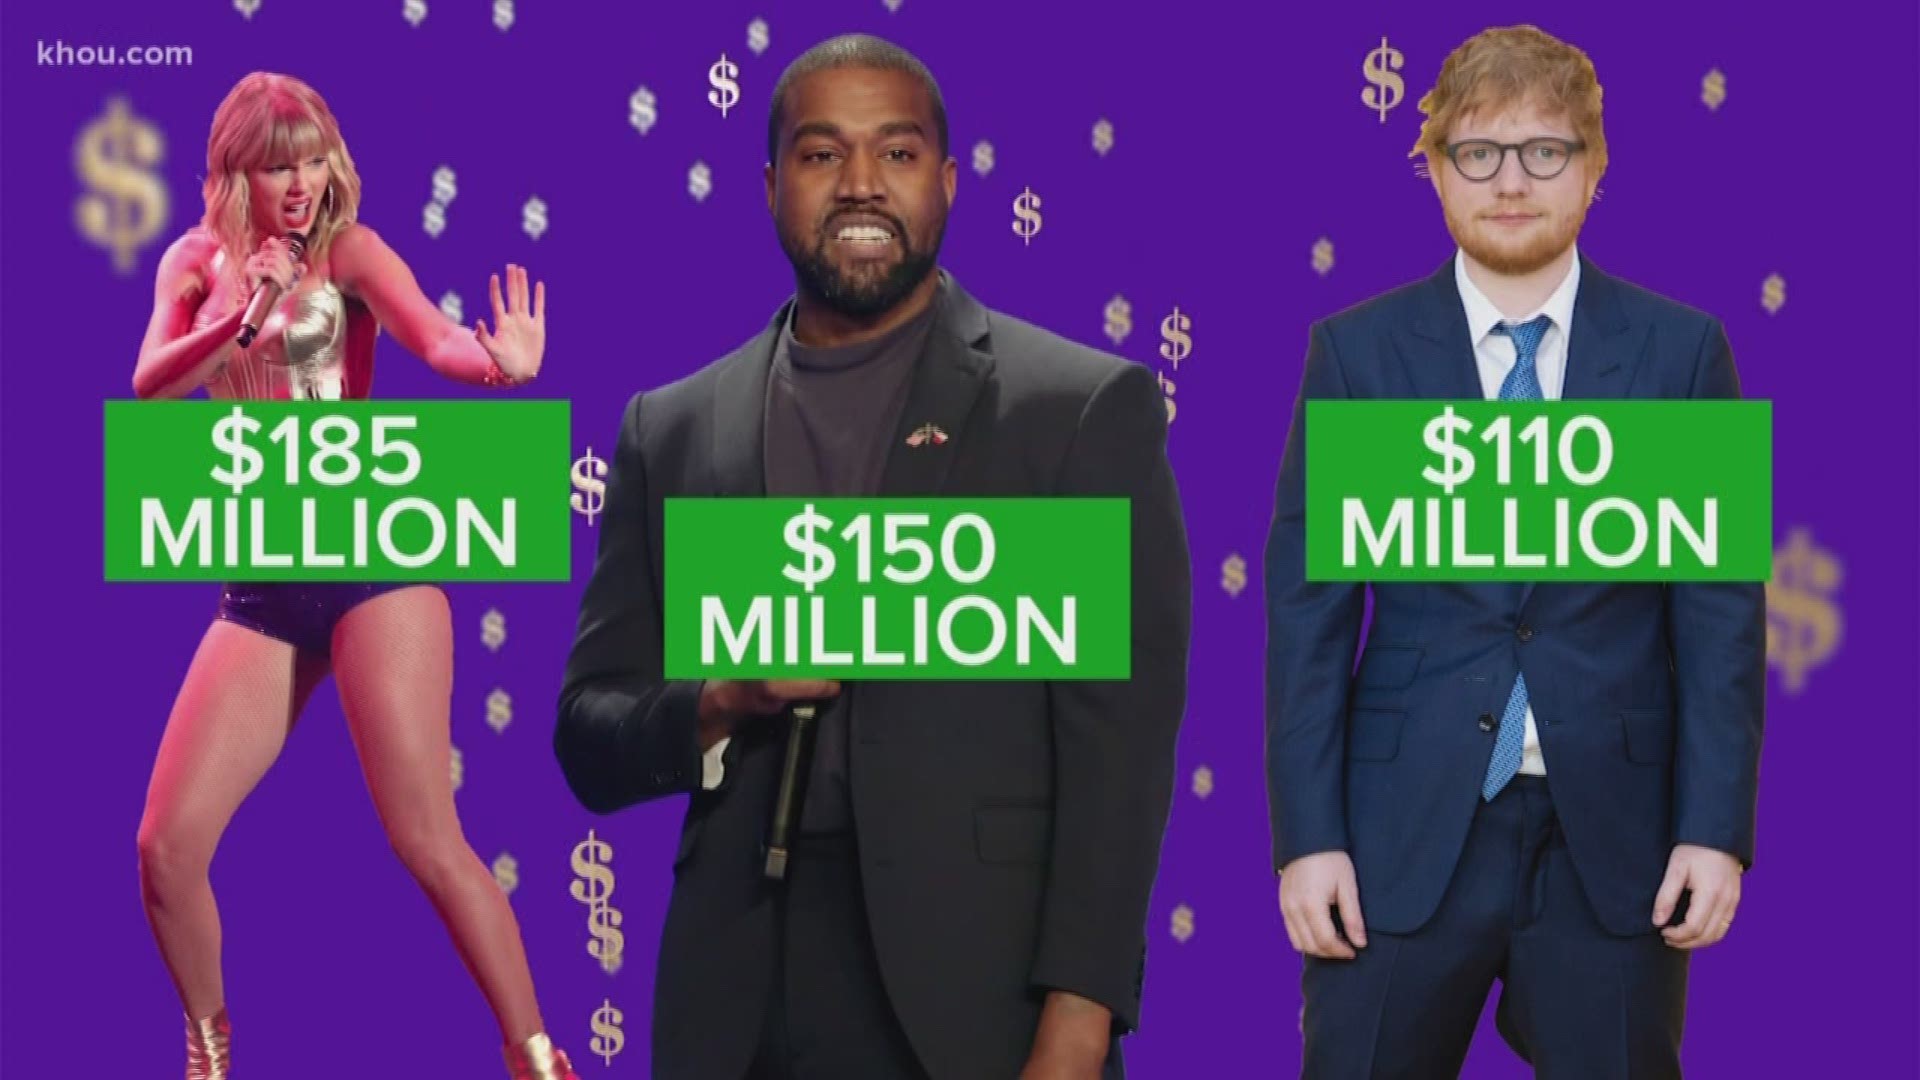 According to Forbes, Taylor Swift is the highest-paid musician of 2019, raking in $185 million.